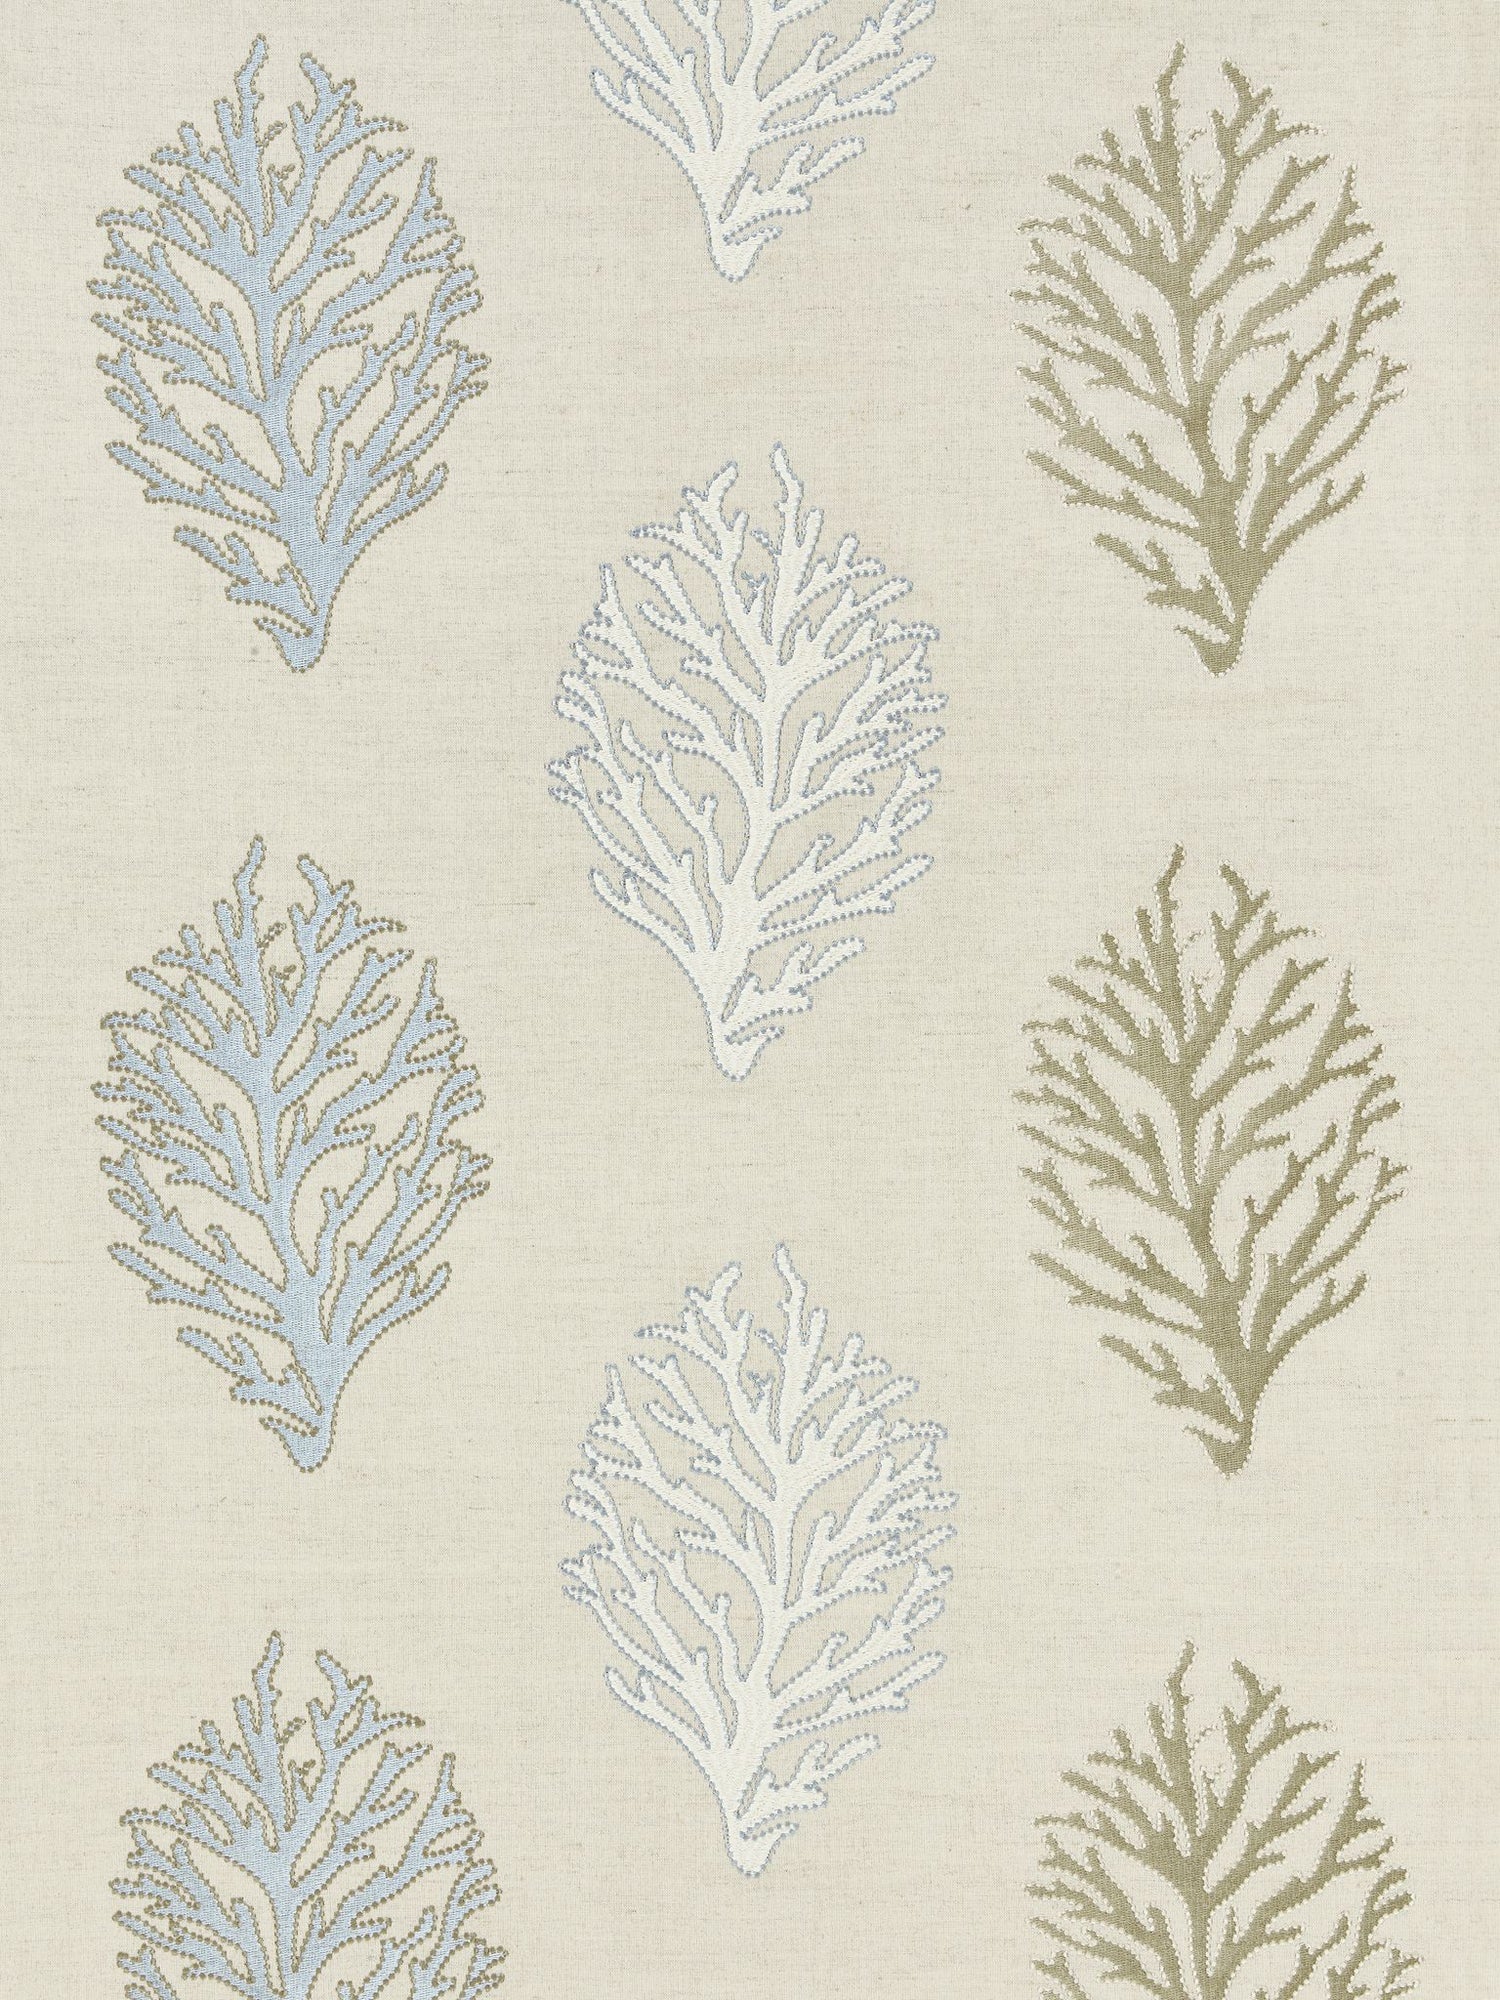 Coral Reef Embroidery fabric in sand color - pattern number GW 000427204 - by Scalamandre in the Grey Watkins collection